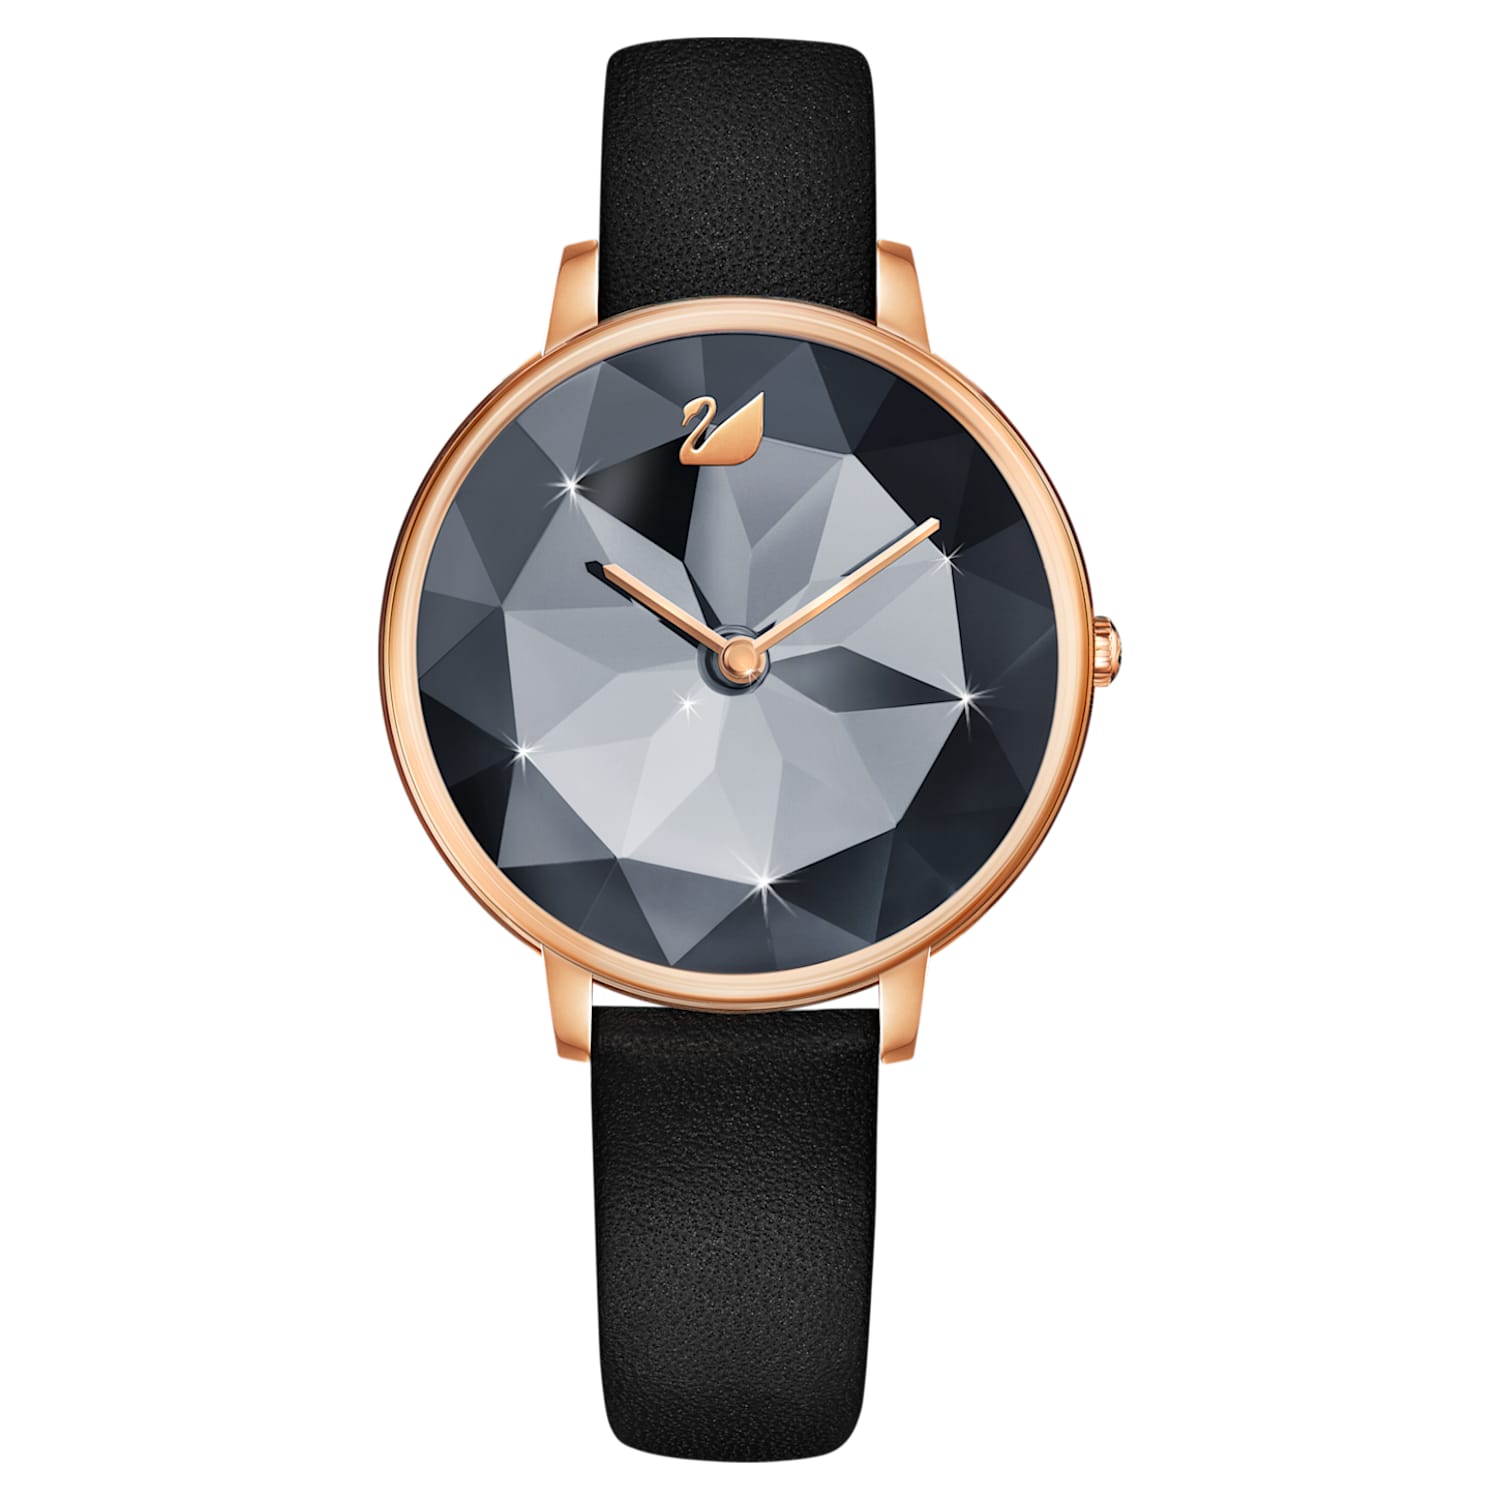 Crystal Lake Watch, Leather strap, Black, Rose-gold tone PVD